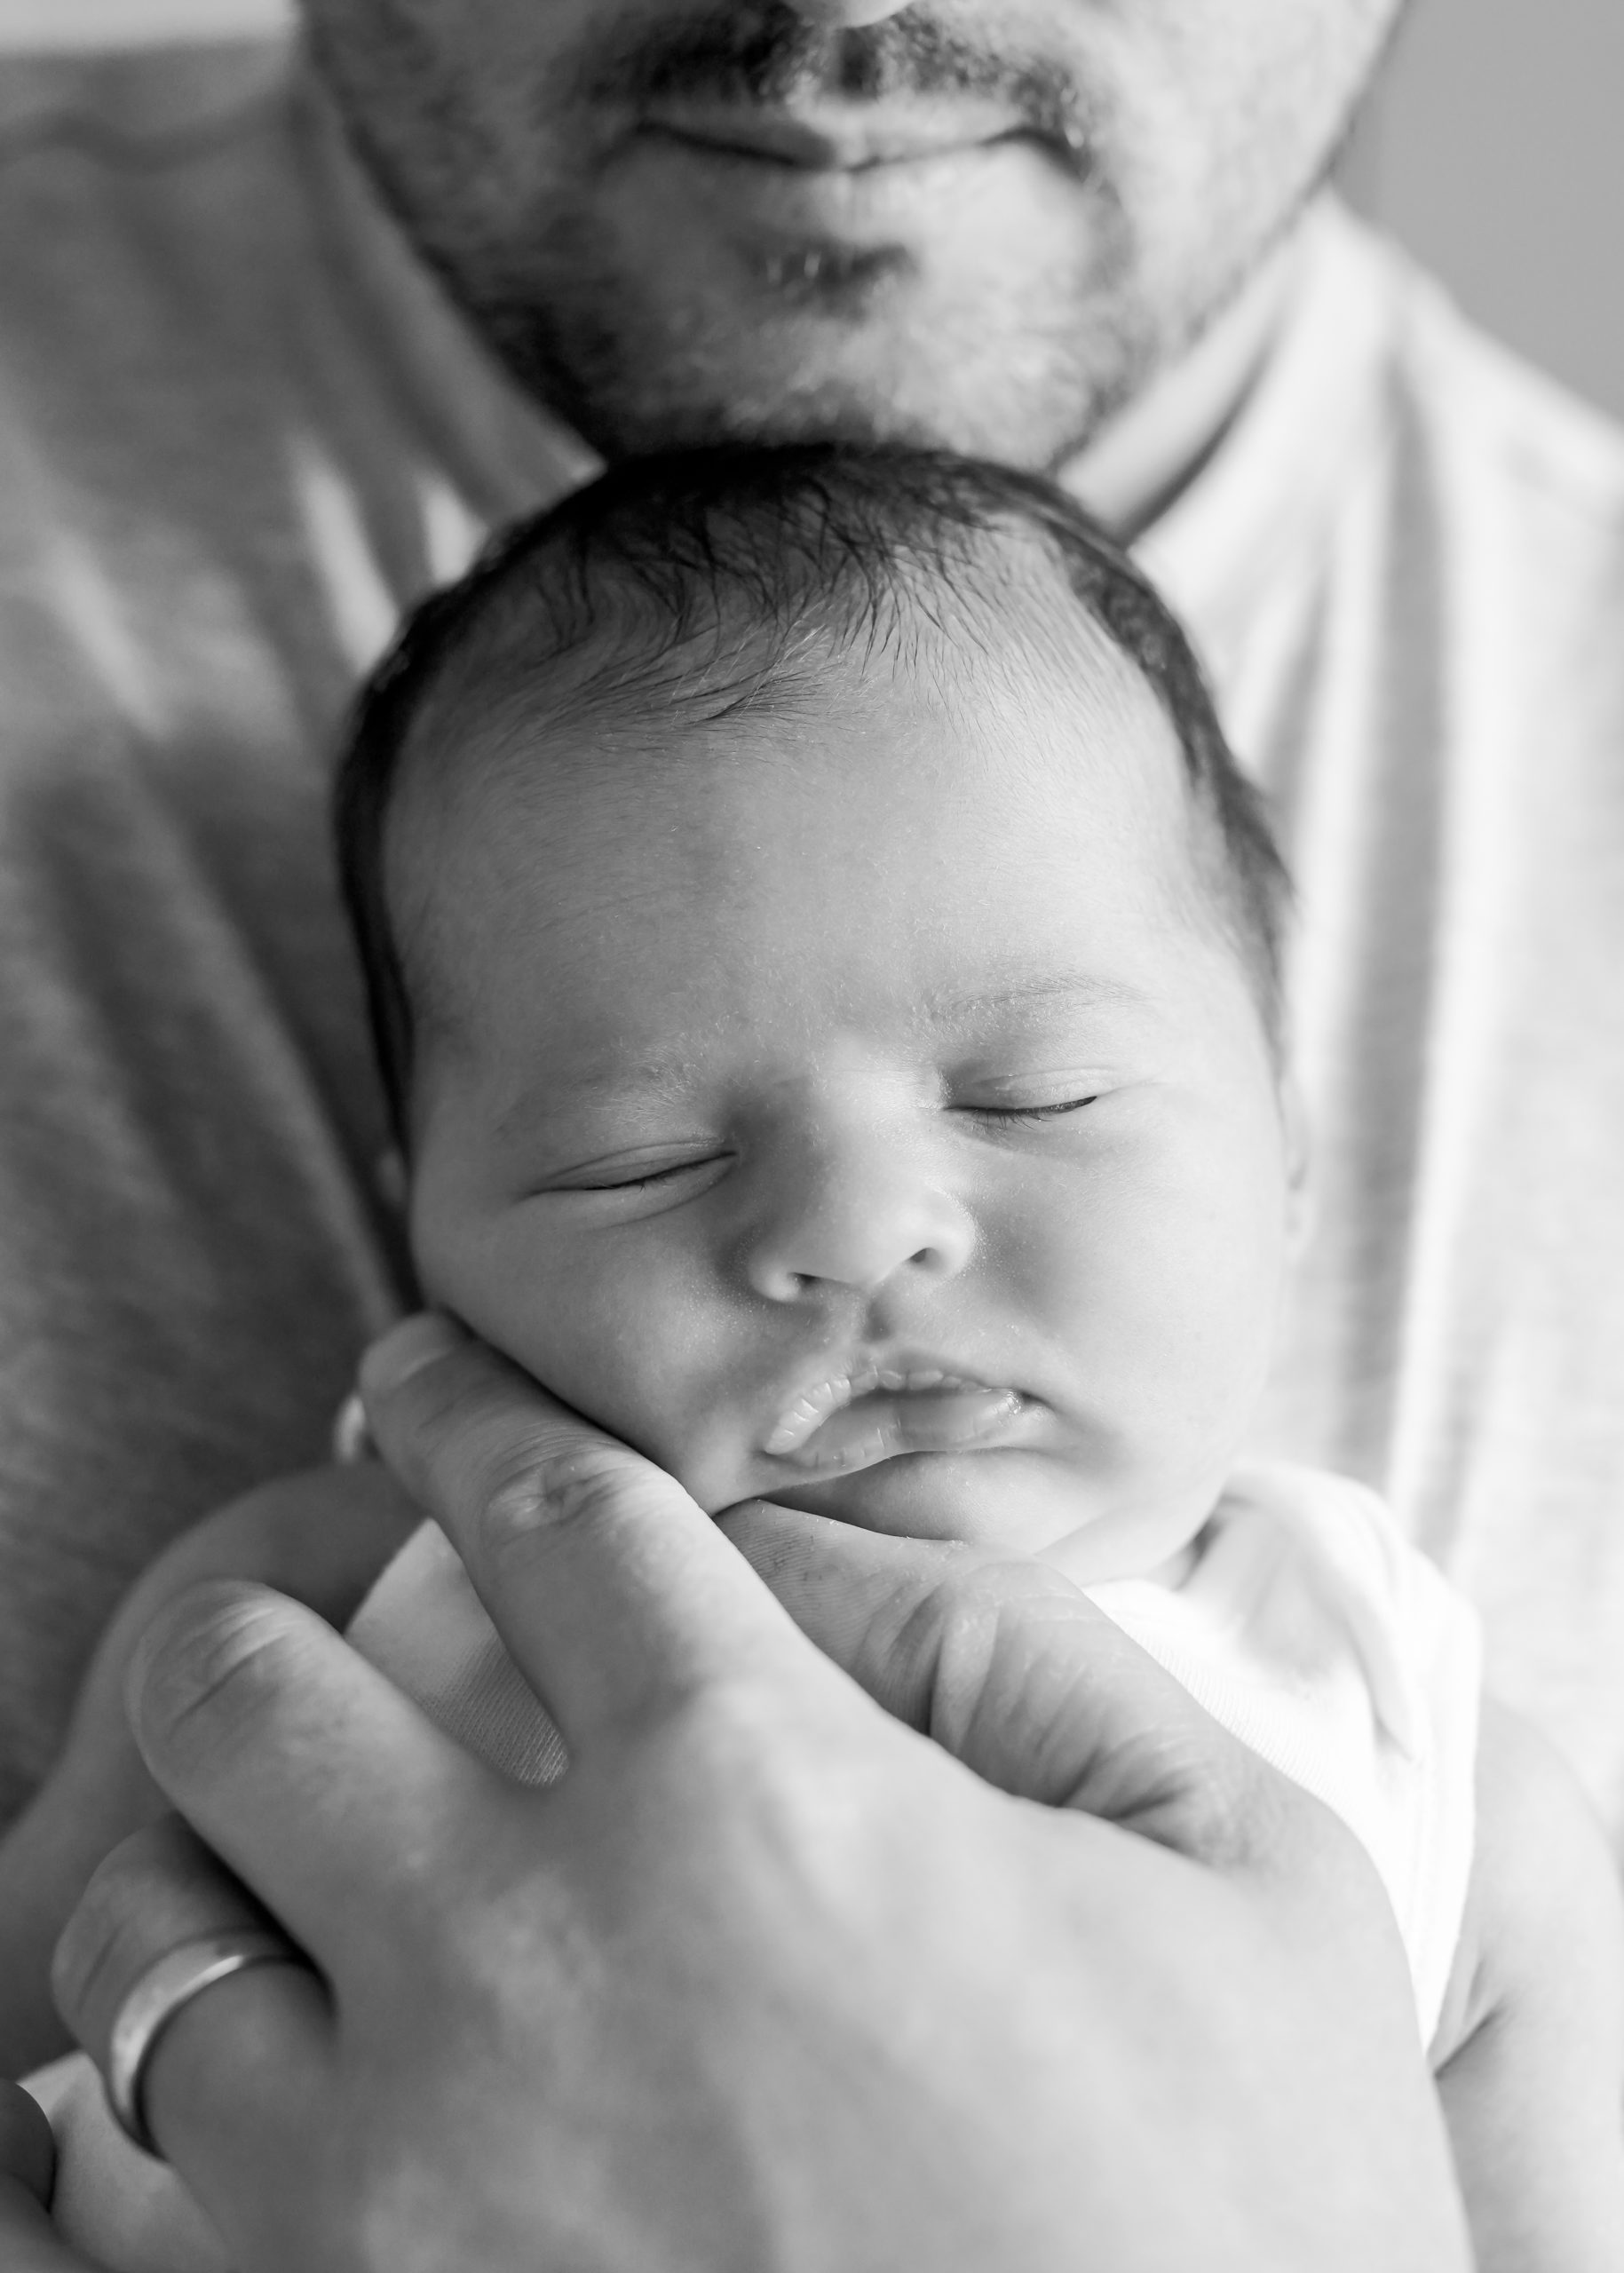 Newborn and baby photographer capturing new beginnings in the comfort of your homoe